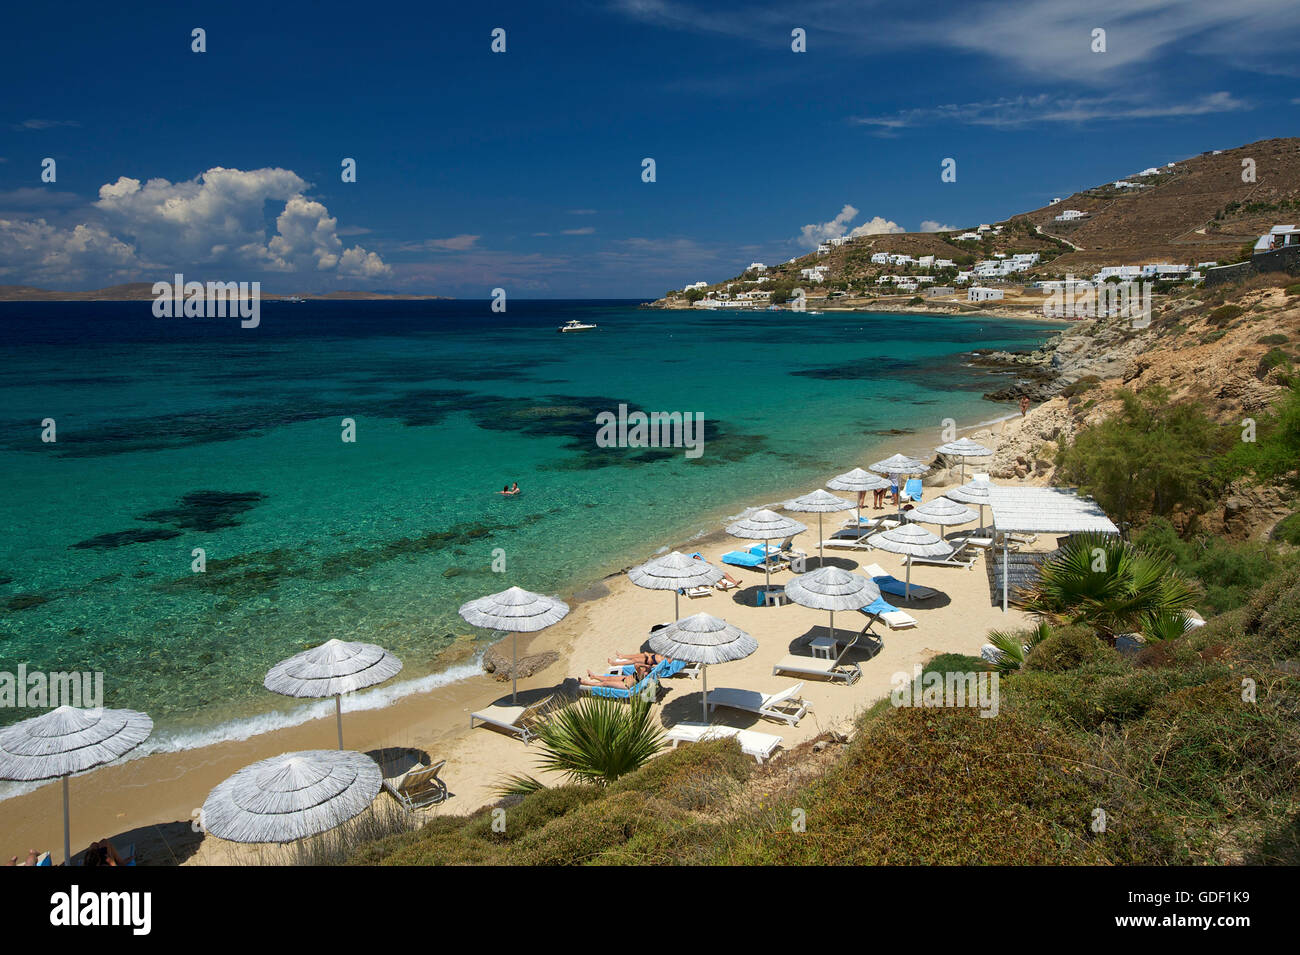 Agios Ioannis Mykonos High Resolution Stock Photography and Images - Alamy